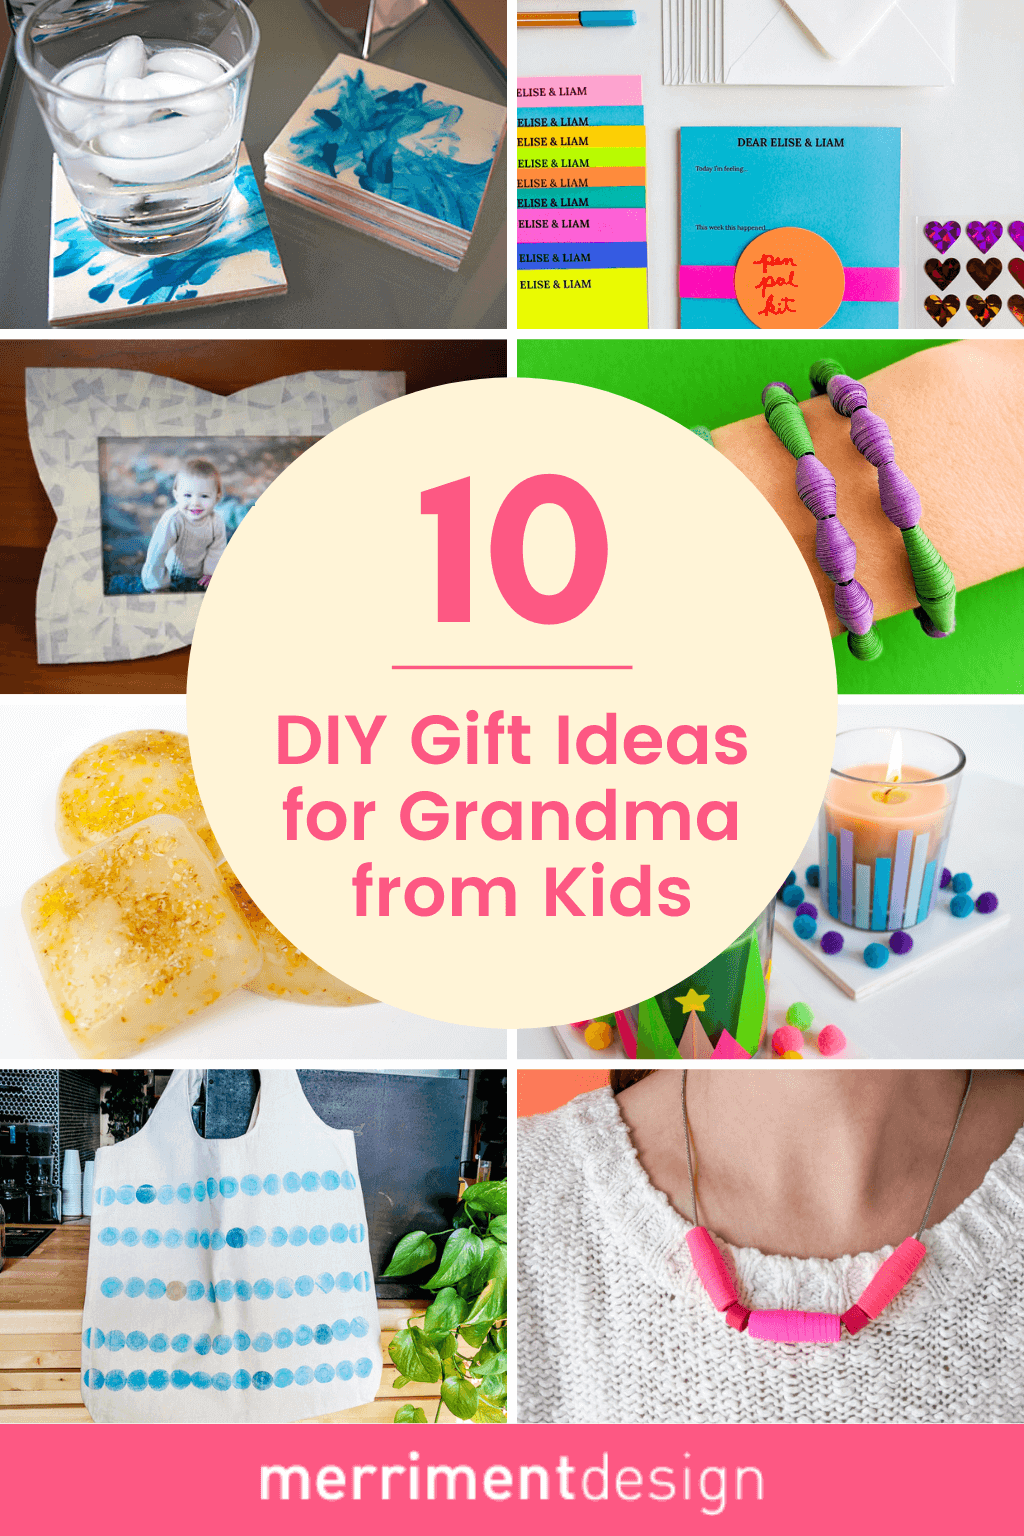 https://www.merrimentdesign.com/images/10-Gifts-for-Grandma-that-kids-can-make.png